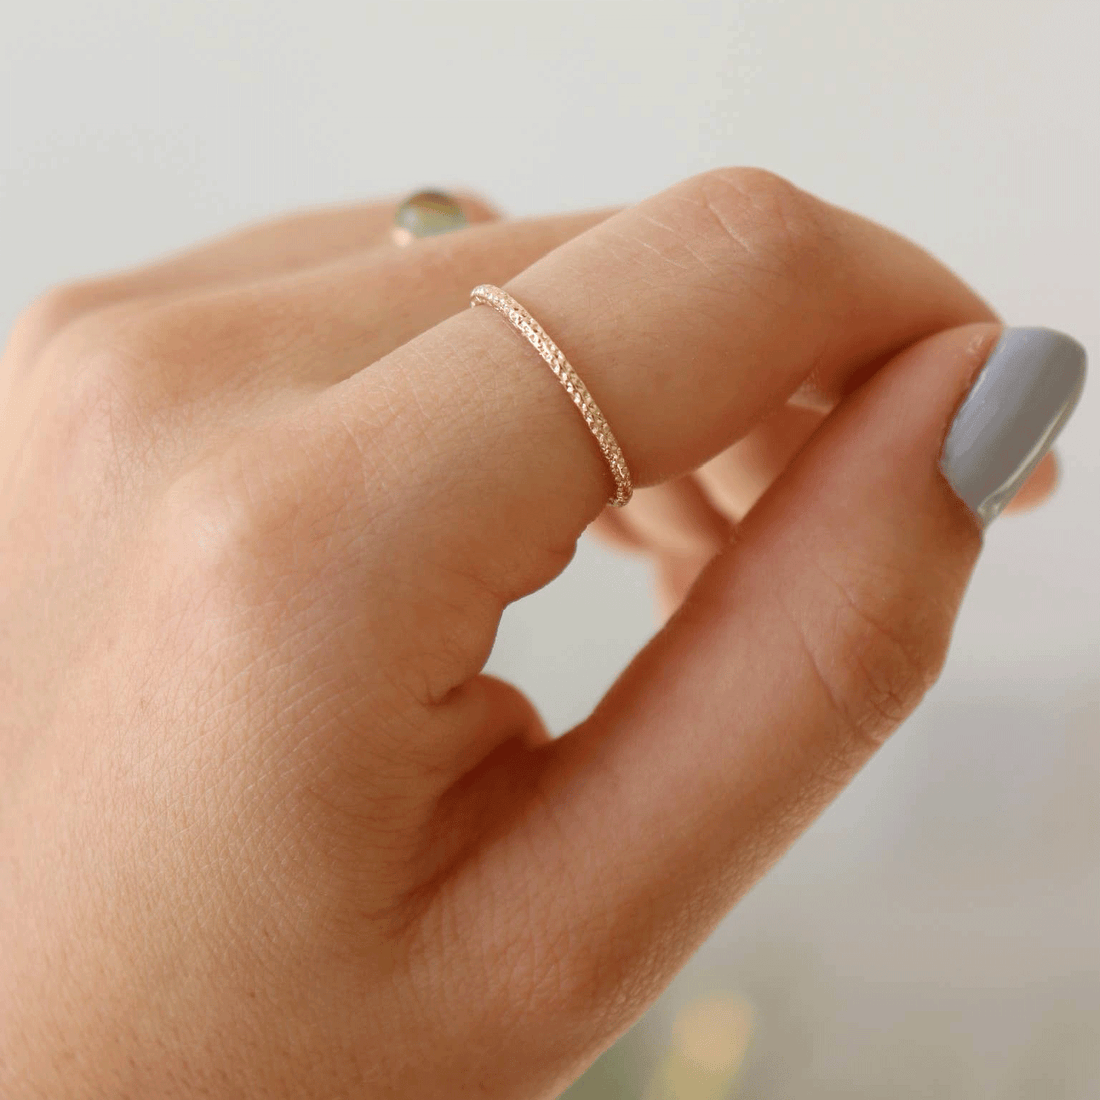 Charity Ring